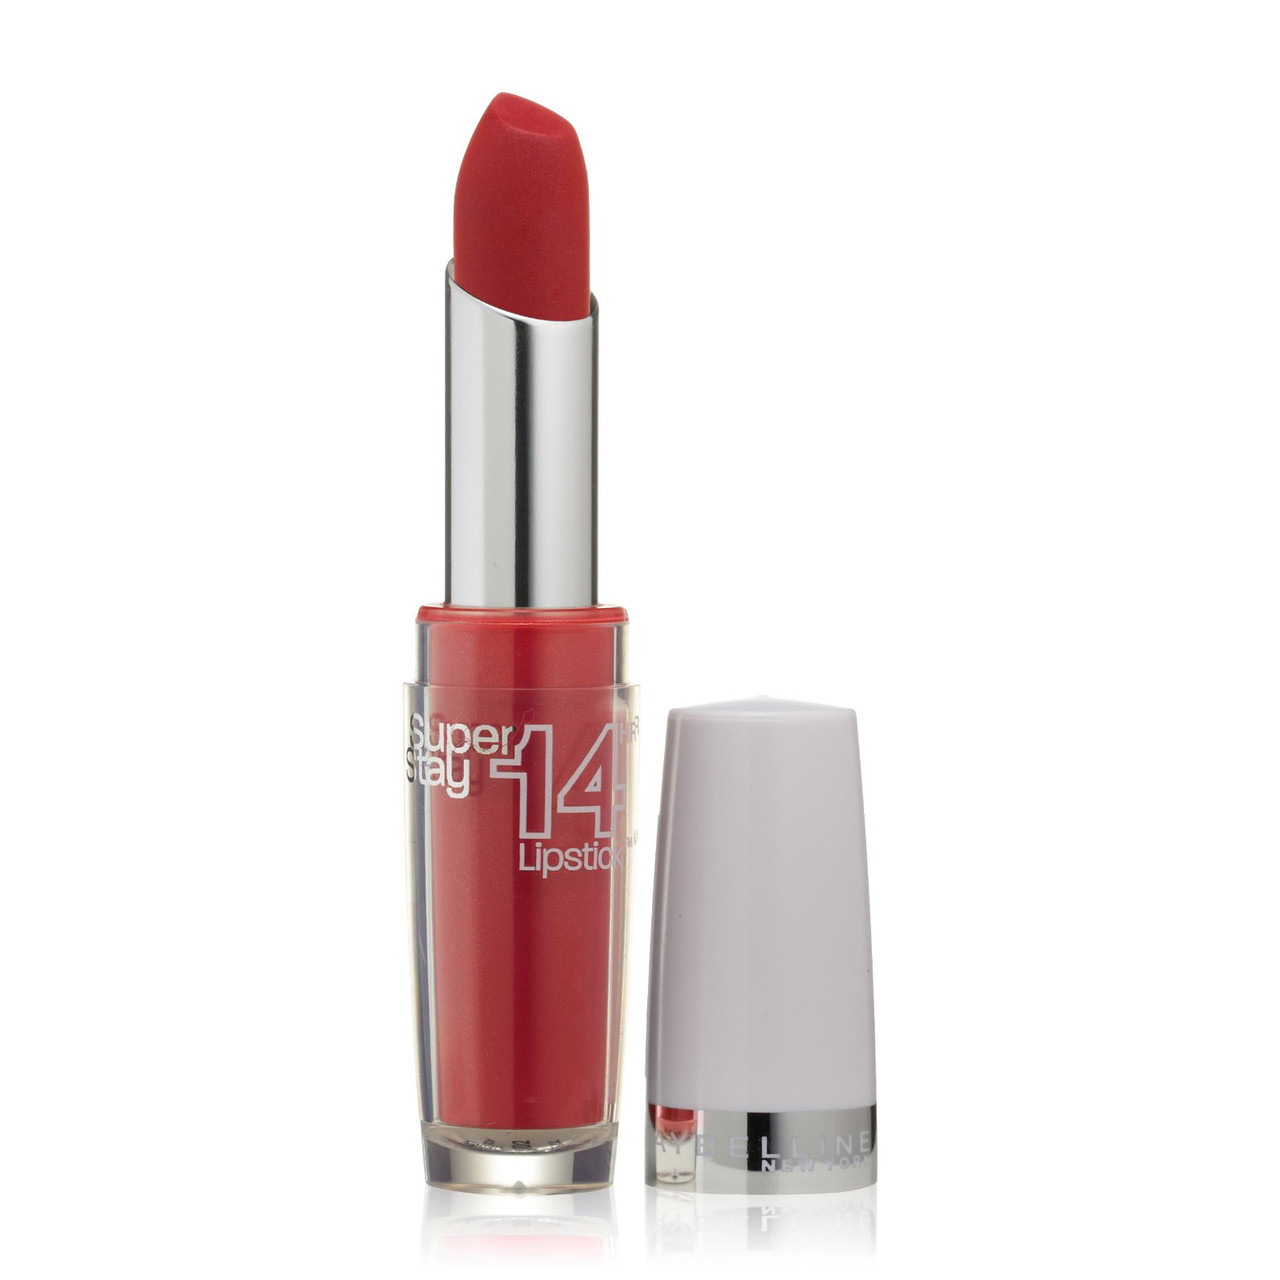 Maybelline New York Super Stay 14HR Lipstick - Continuous Cranberry (060) -  Hard To Find Beauty